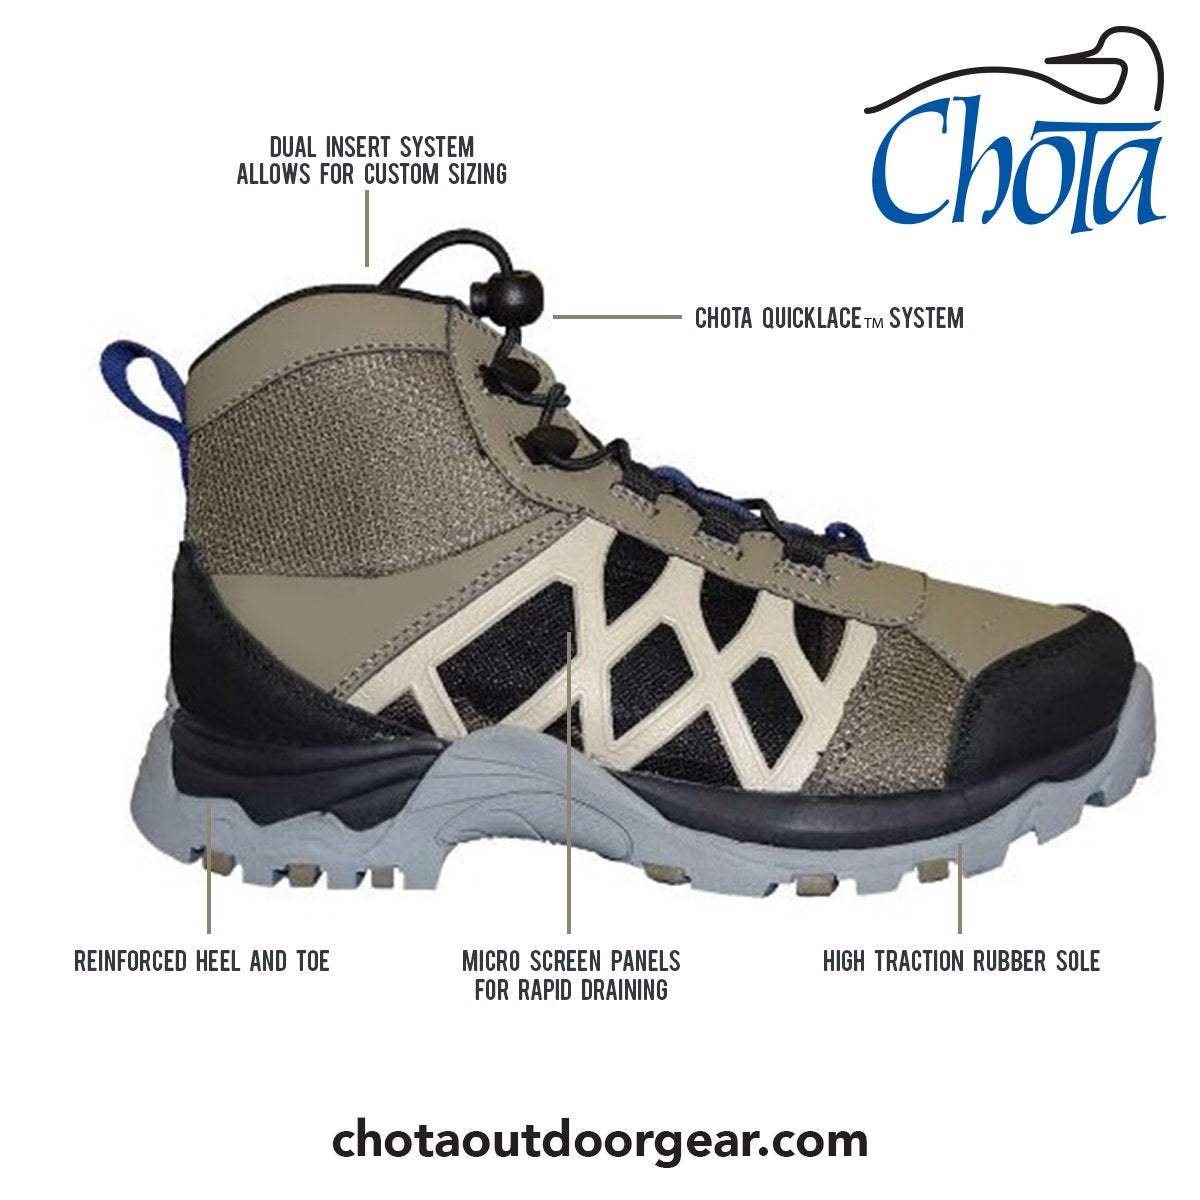 HYBRID HIGH-TOP RUBBER SOLED BOOT